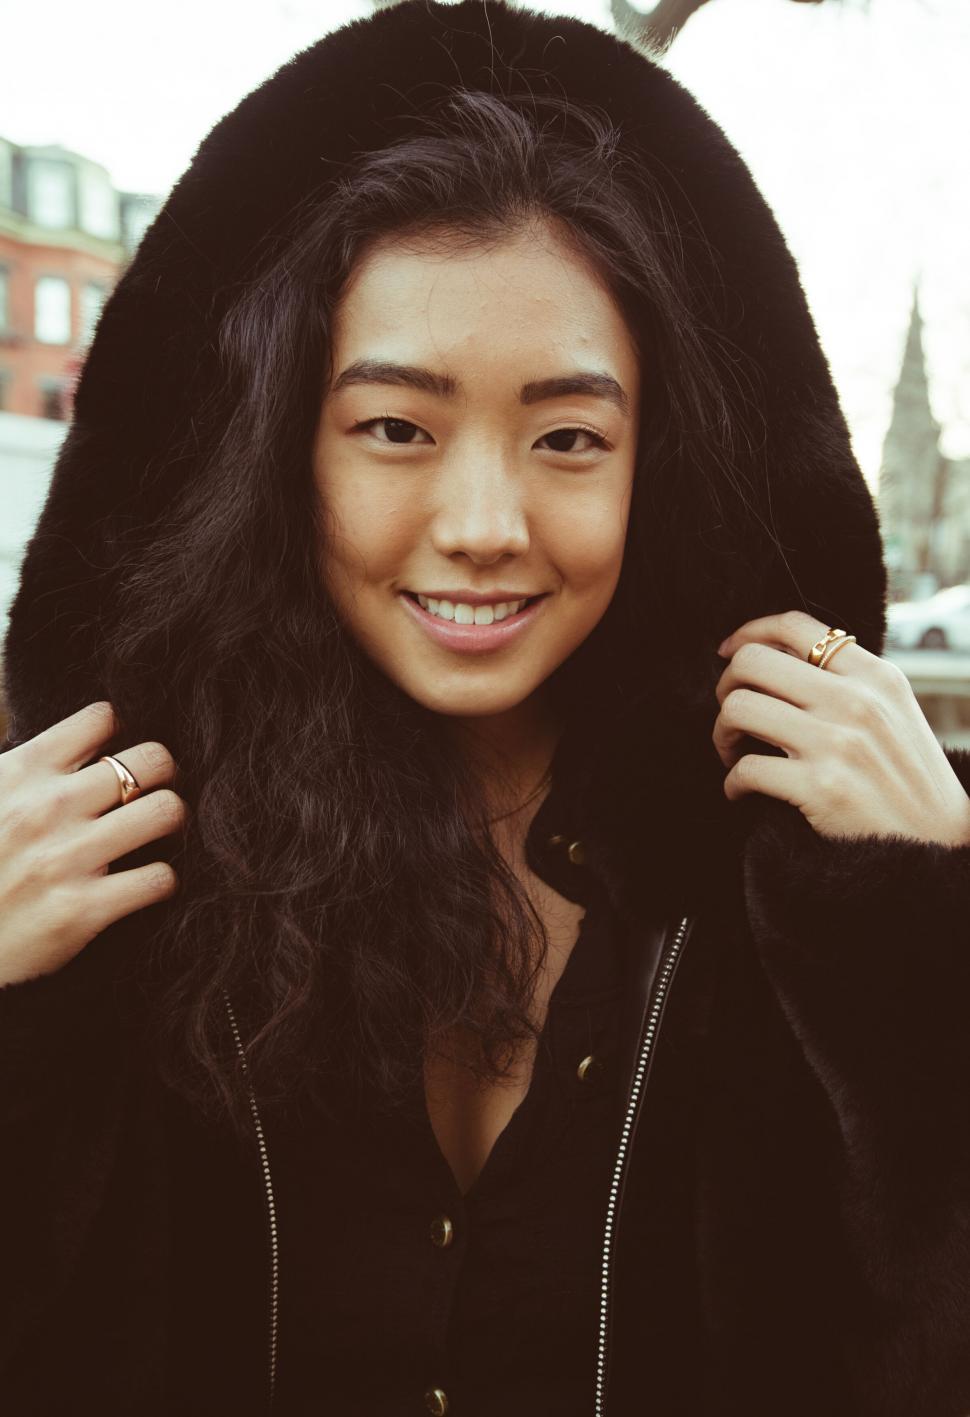 Free Image of Asian woman smiling in hooded fur coat 